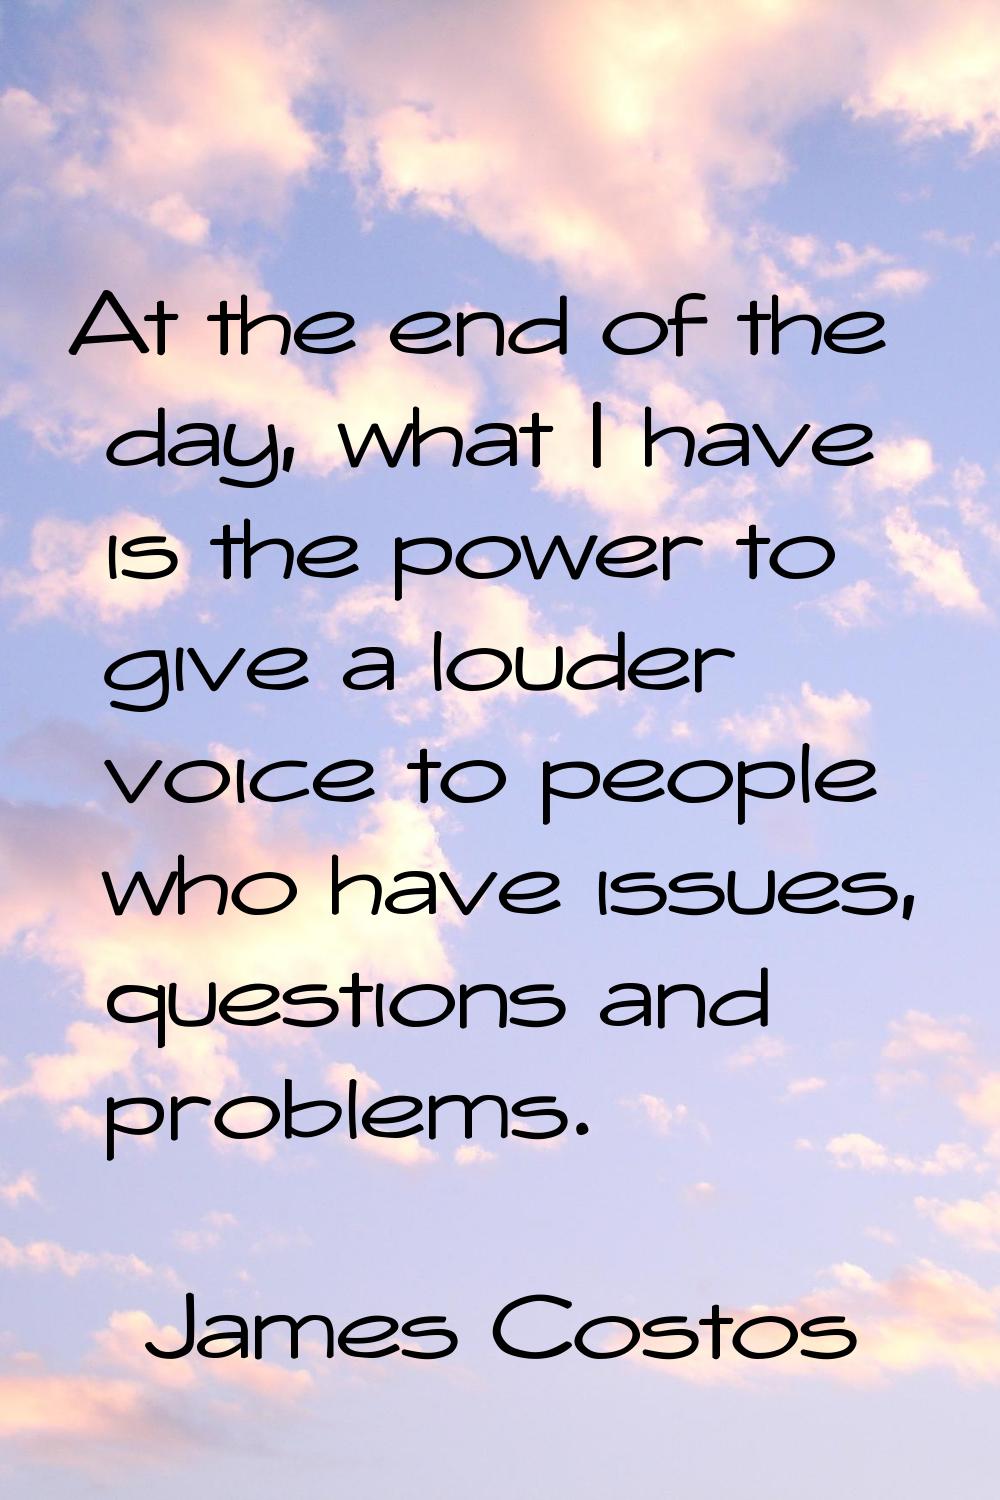 At the end of the day, what I have is the power to give a louder voice to people who have issues, q